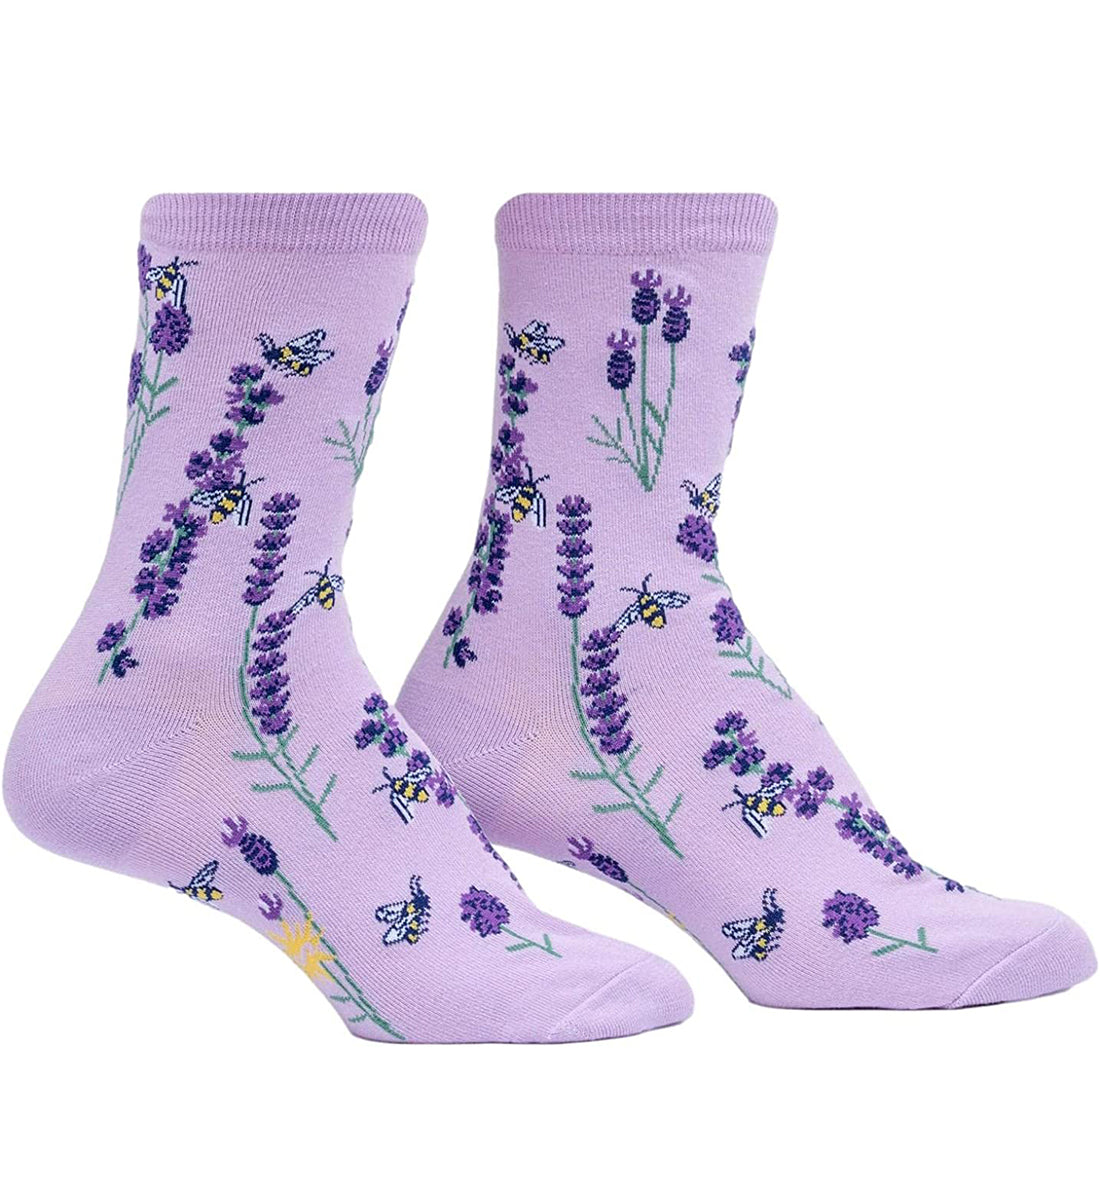 SOCK it to me Women's Crew Socks (W0404-1),Bees and Lavender - Bees and Lavender,One Size